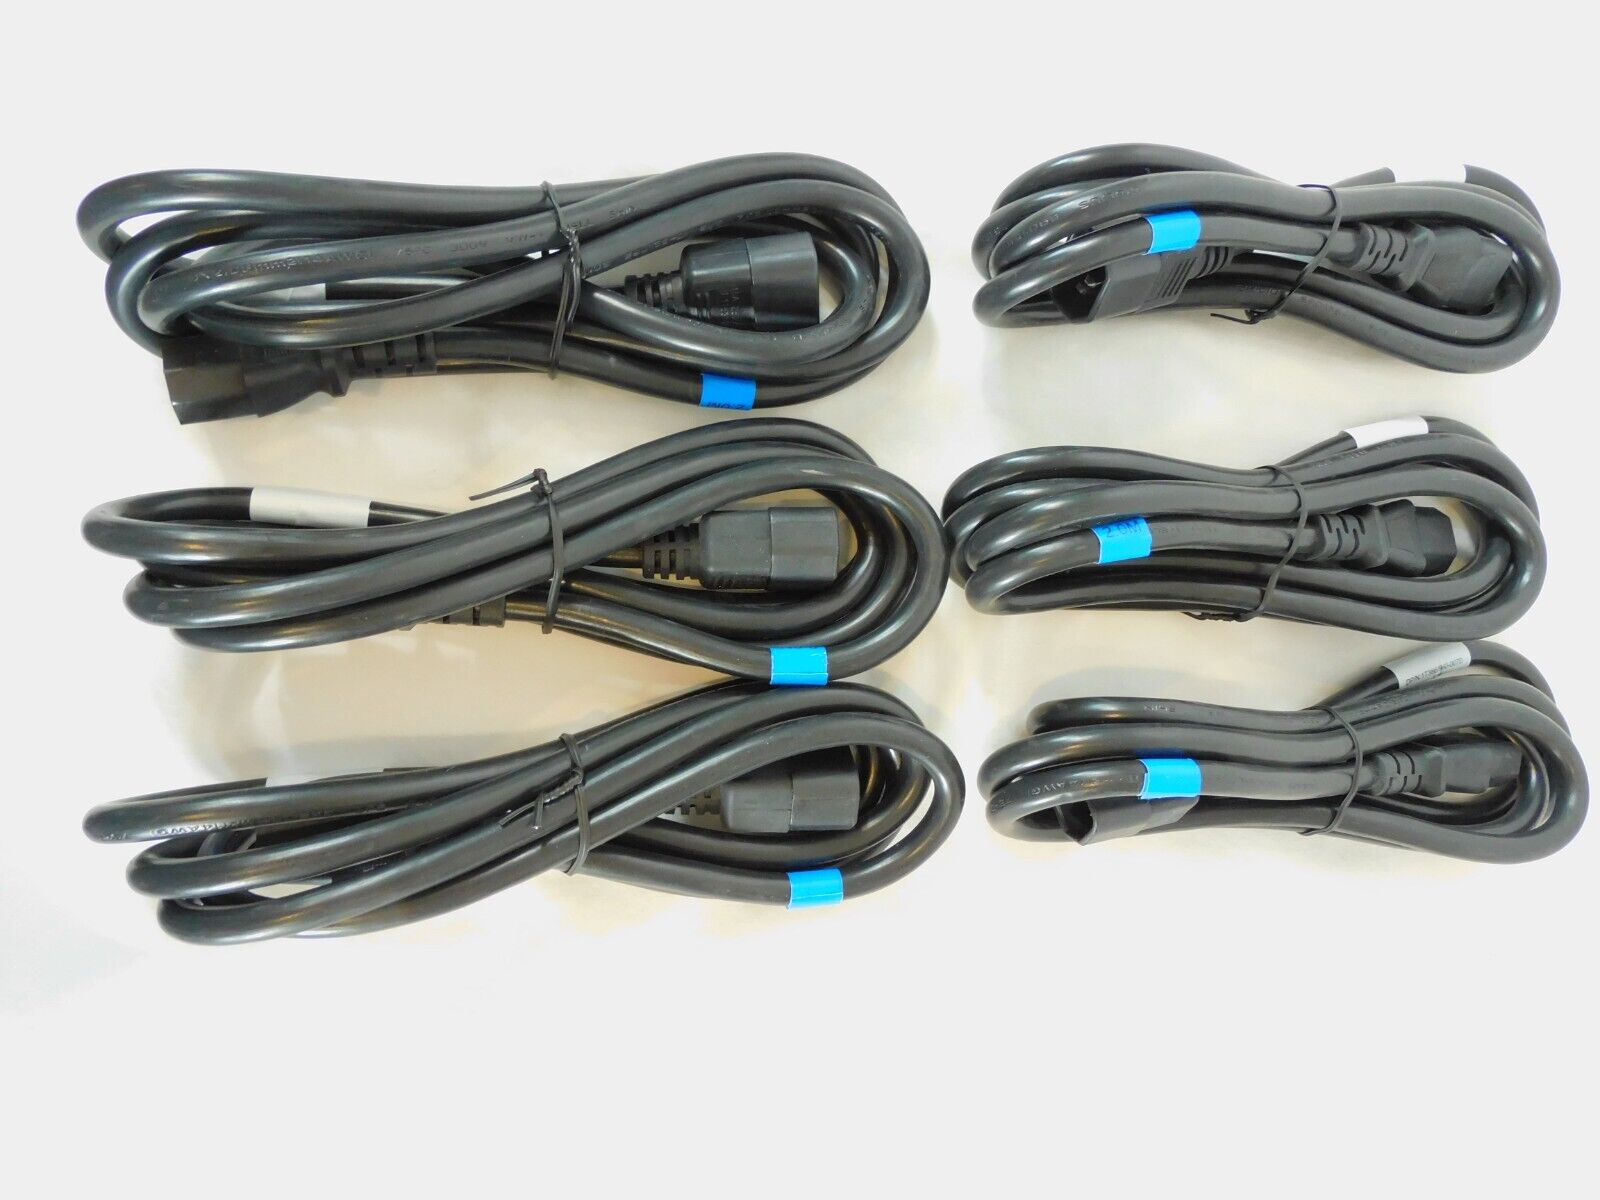 Dell 1T386 960-0070 Power Cable Cord C13 - C14 - LOT OF 6